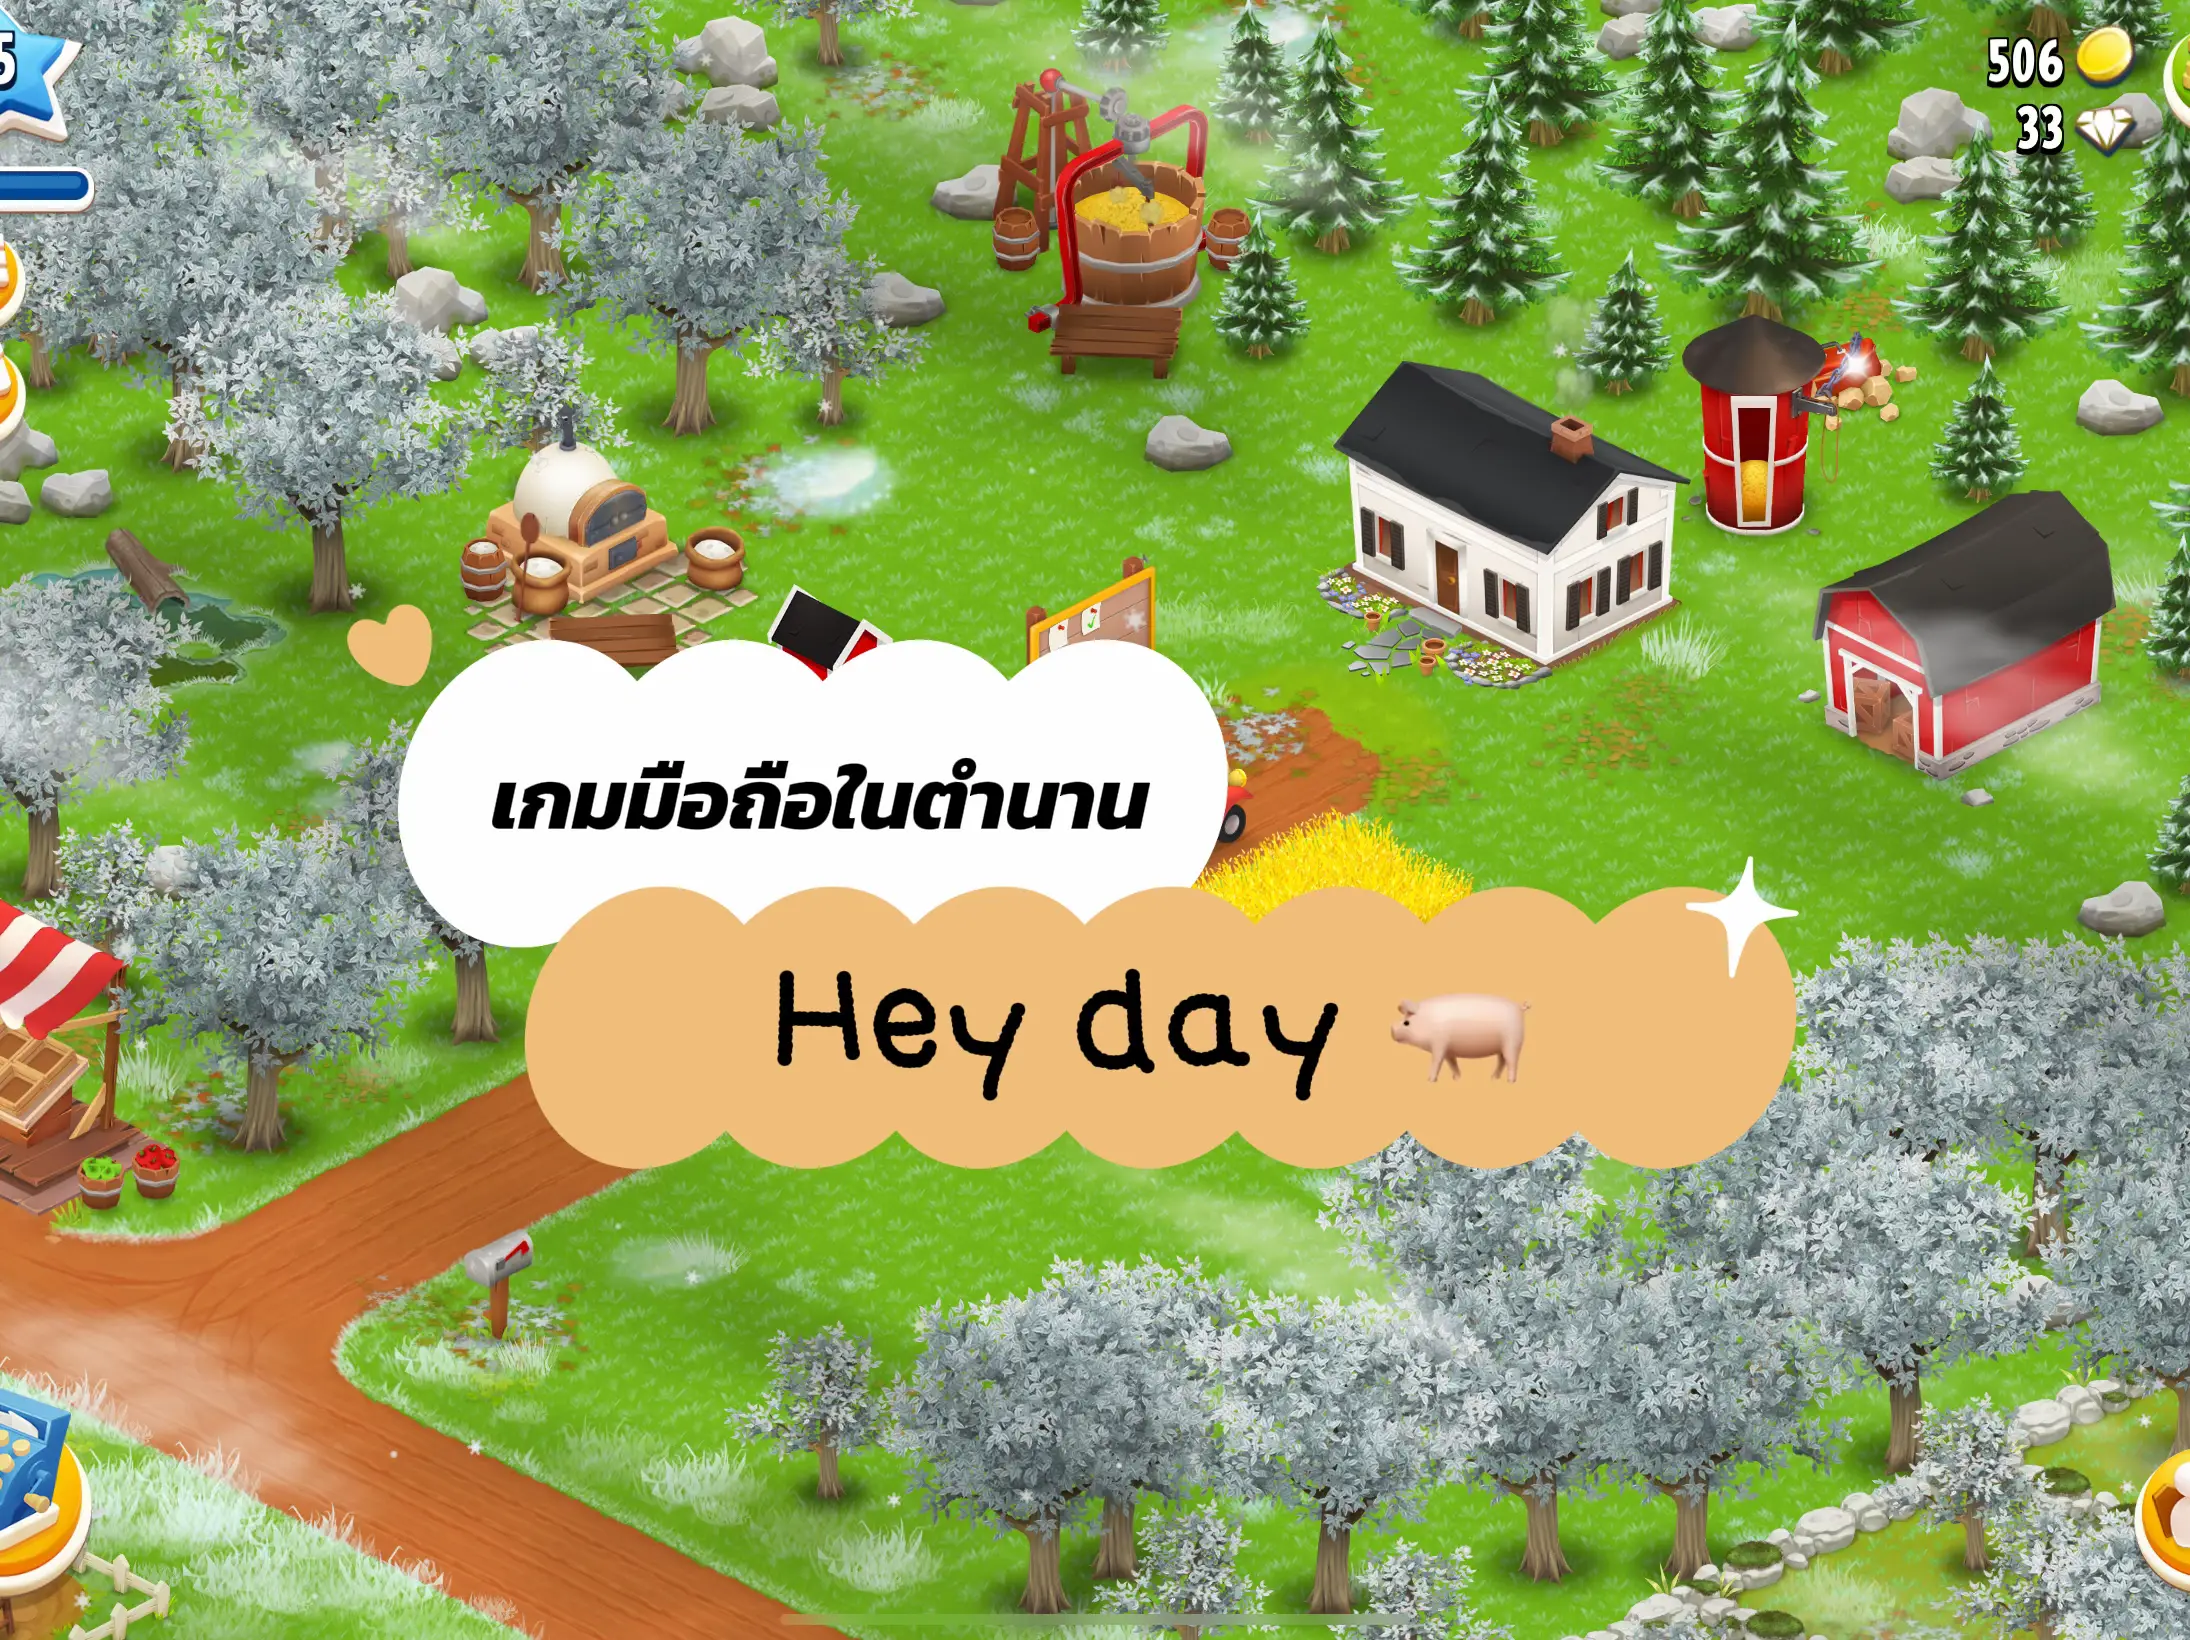 Hey day, the legendary mobile game.🐖